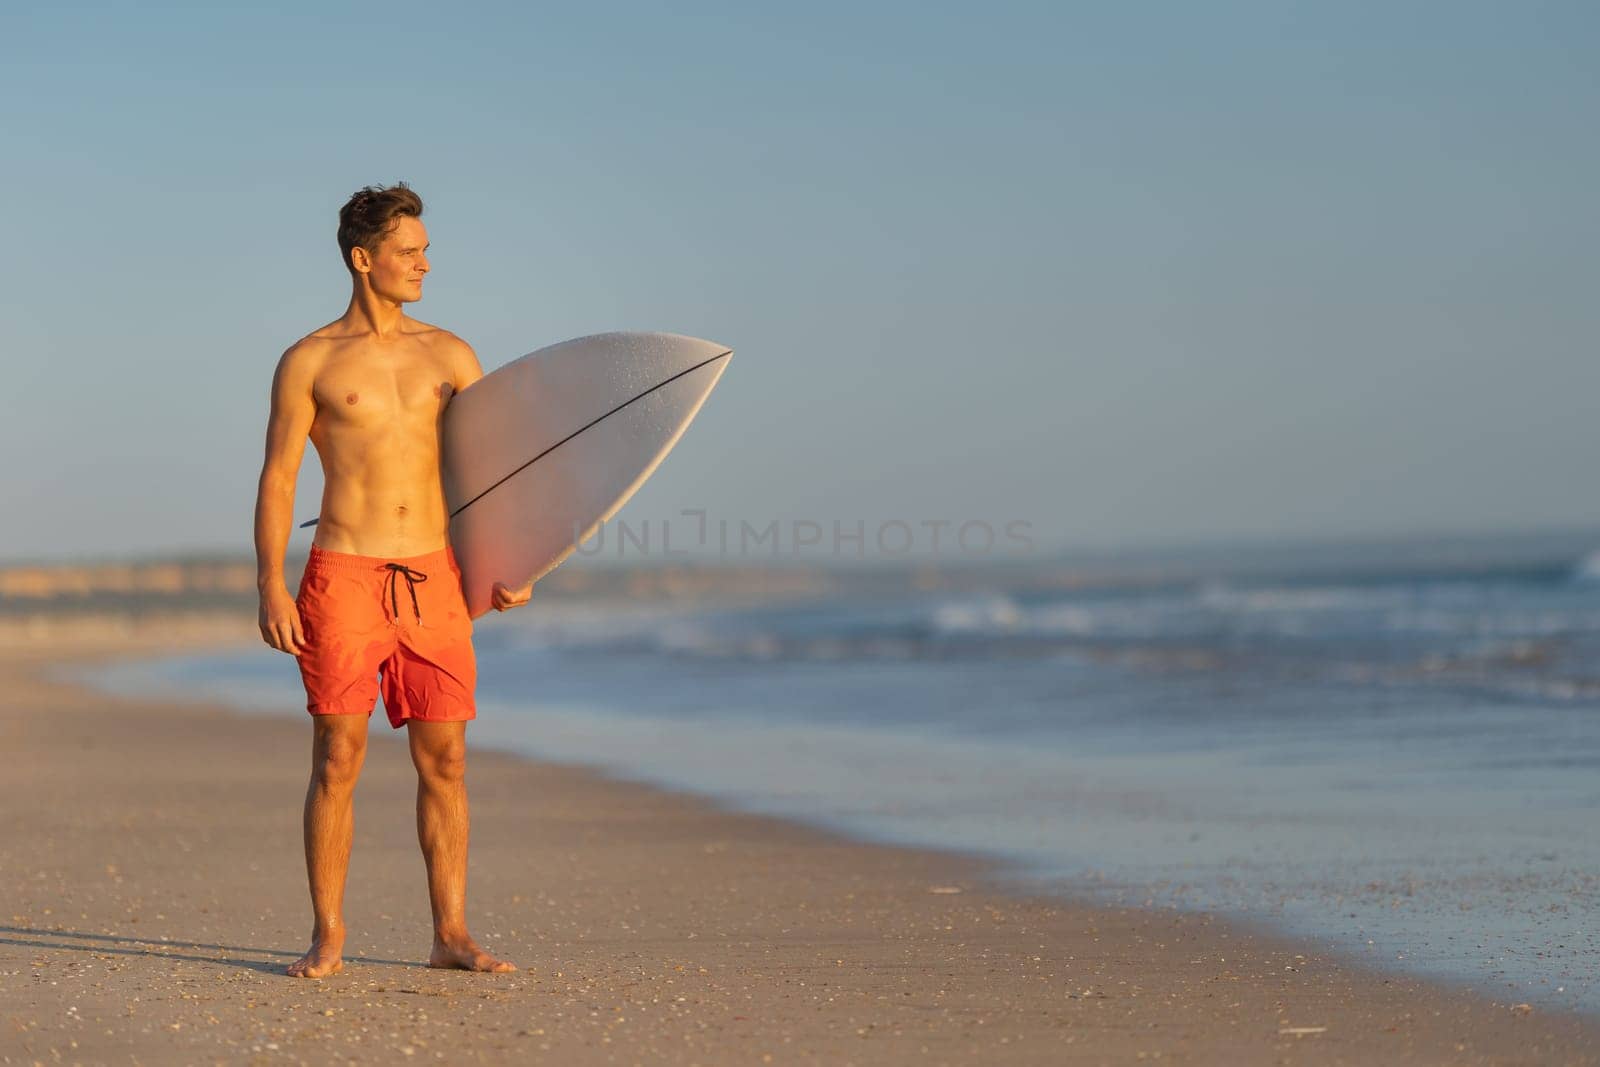 An attractive man with nice athletic body standing on the shore holding a surfboard at early sunset. Mid shot